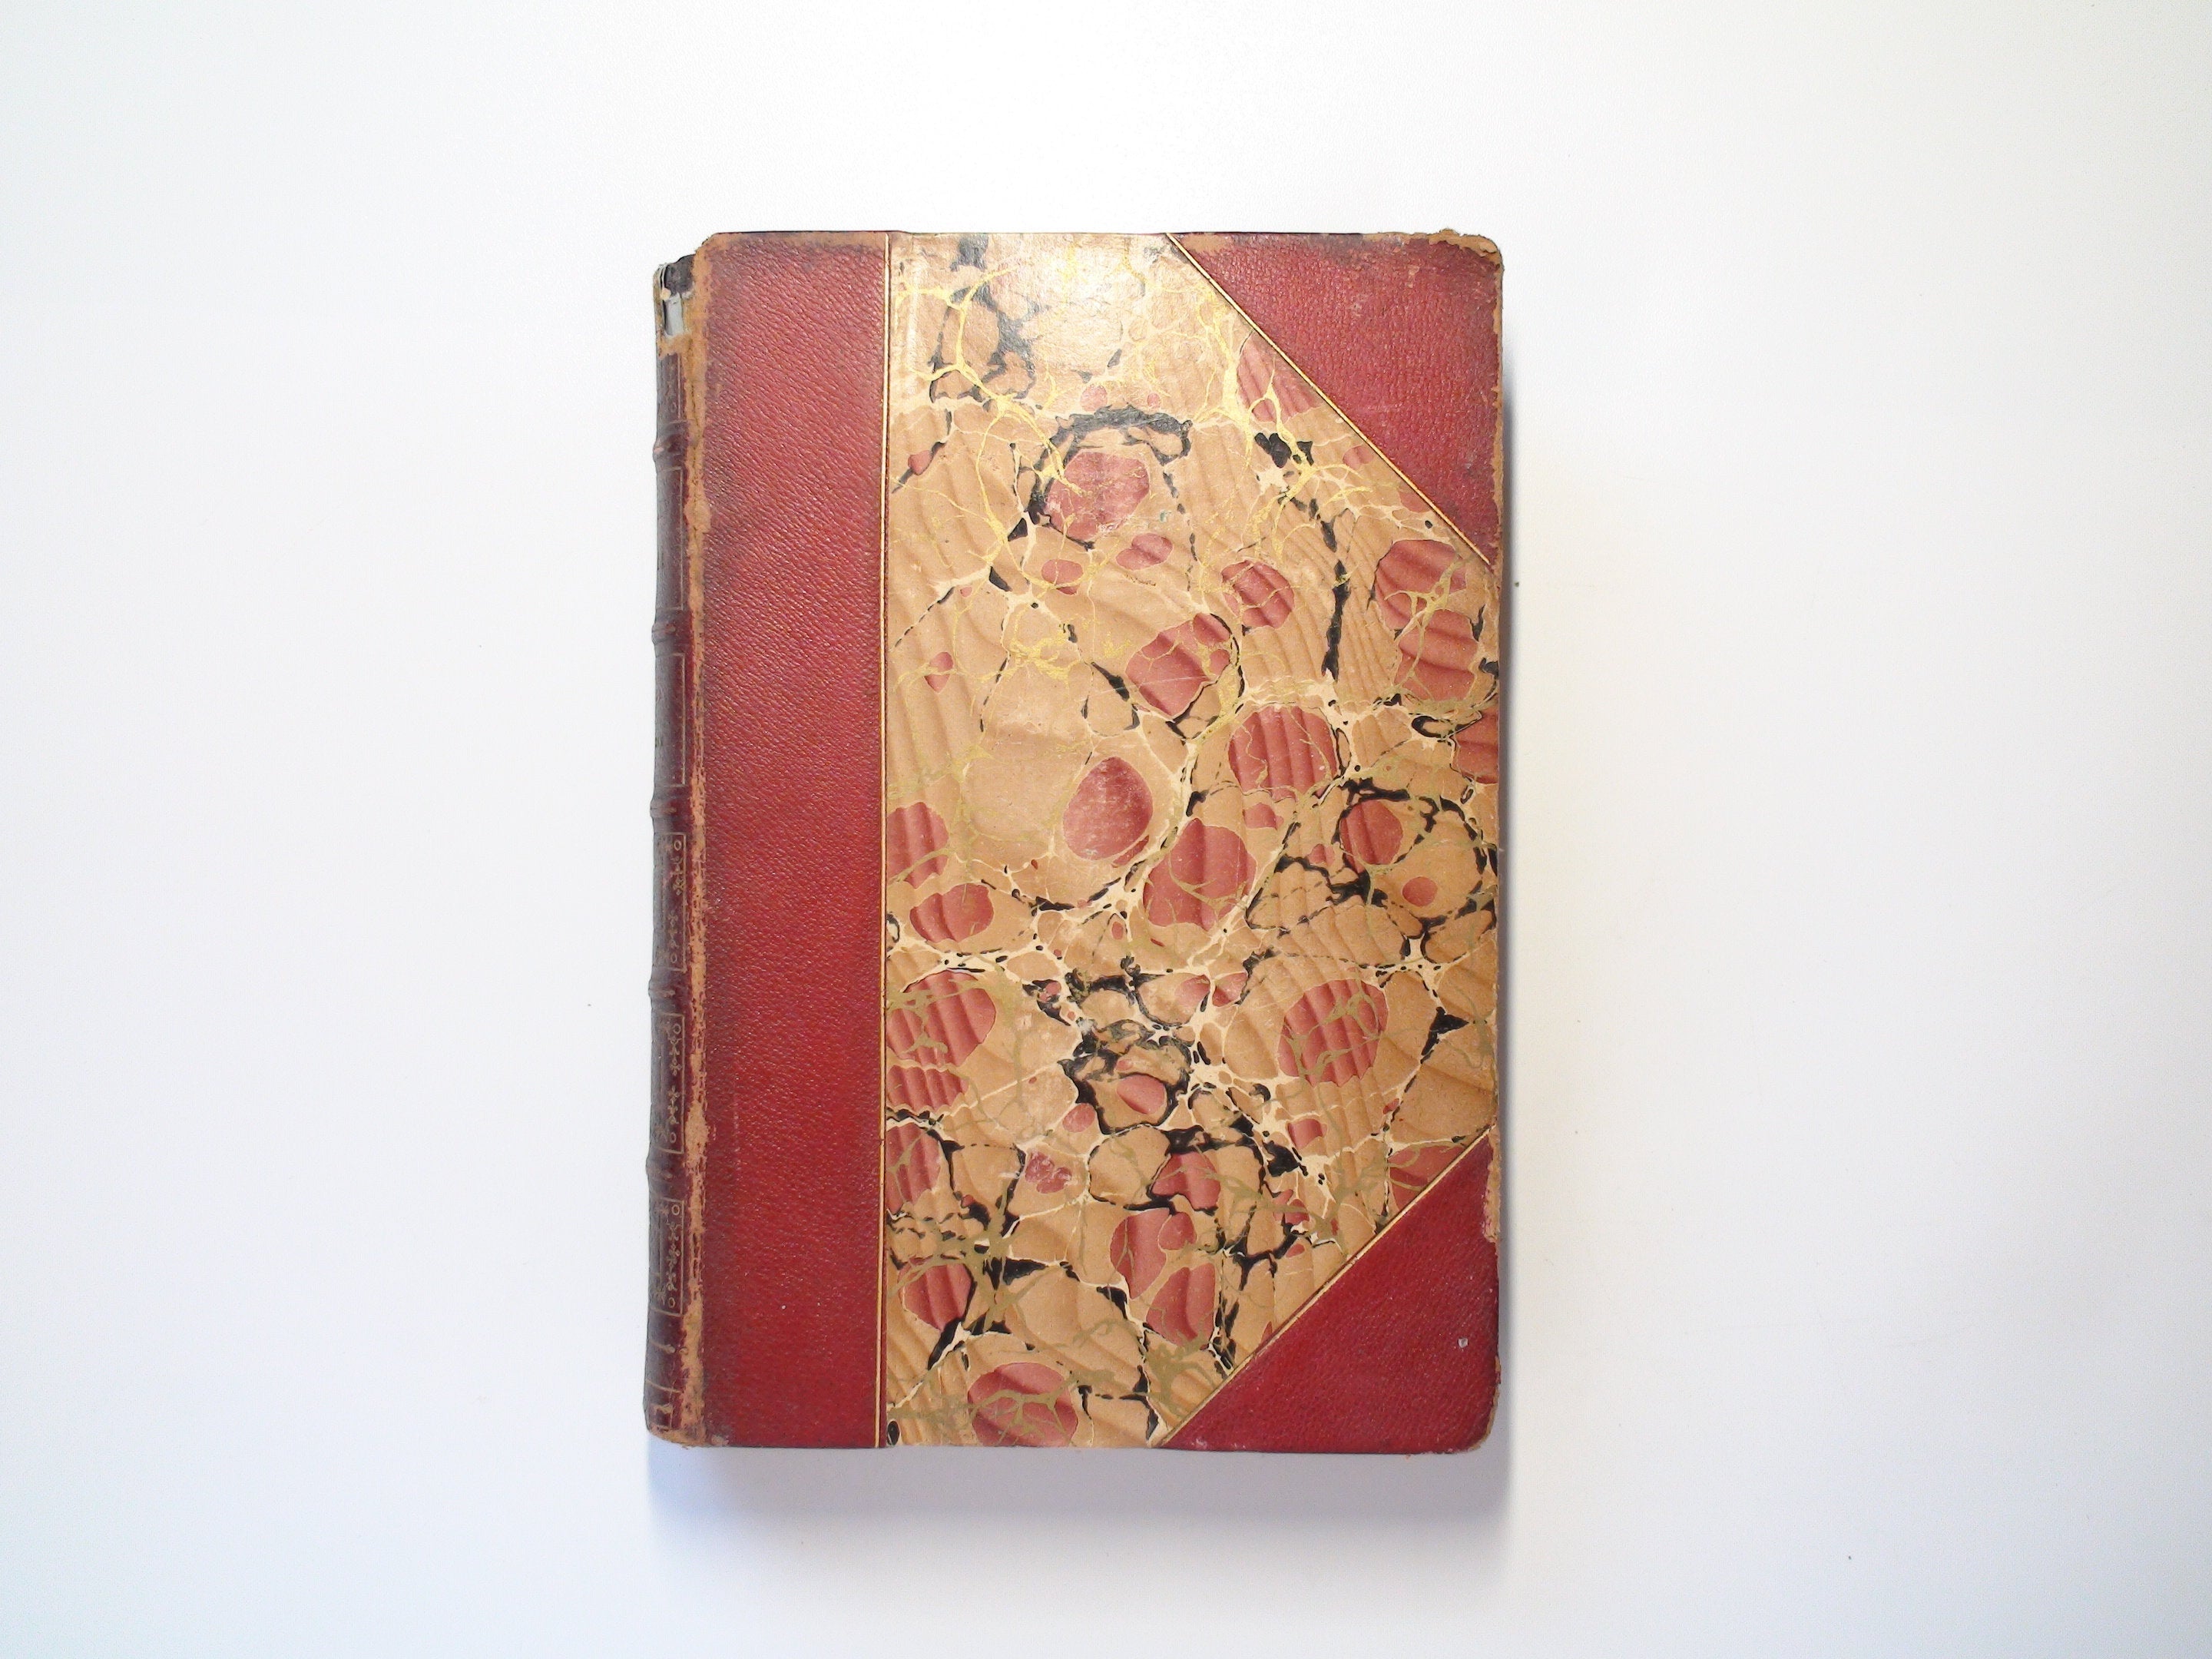 Waverly Novels Vol XV, Peveril of the Peak, by Sir Walter Scott, Leather, 1871